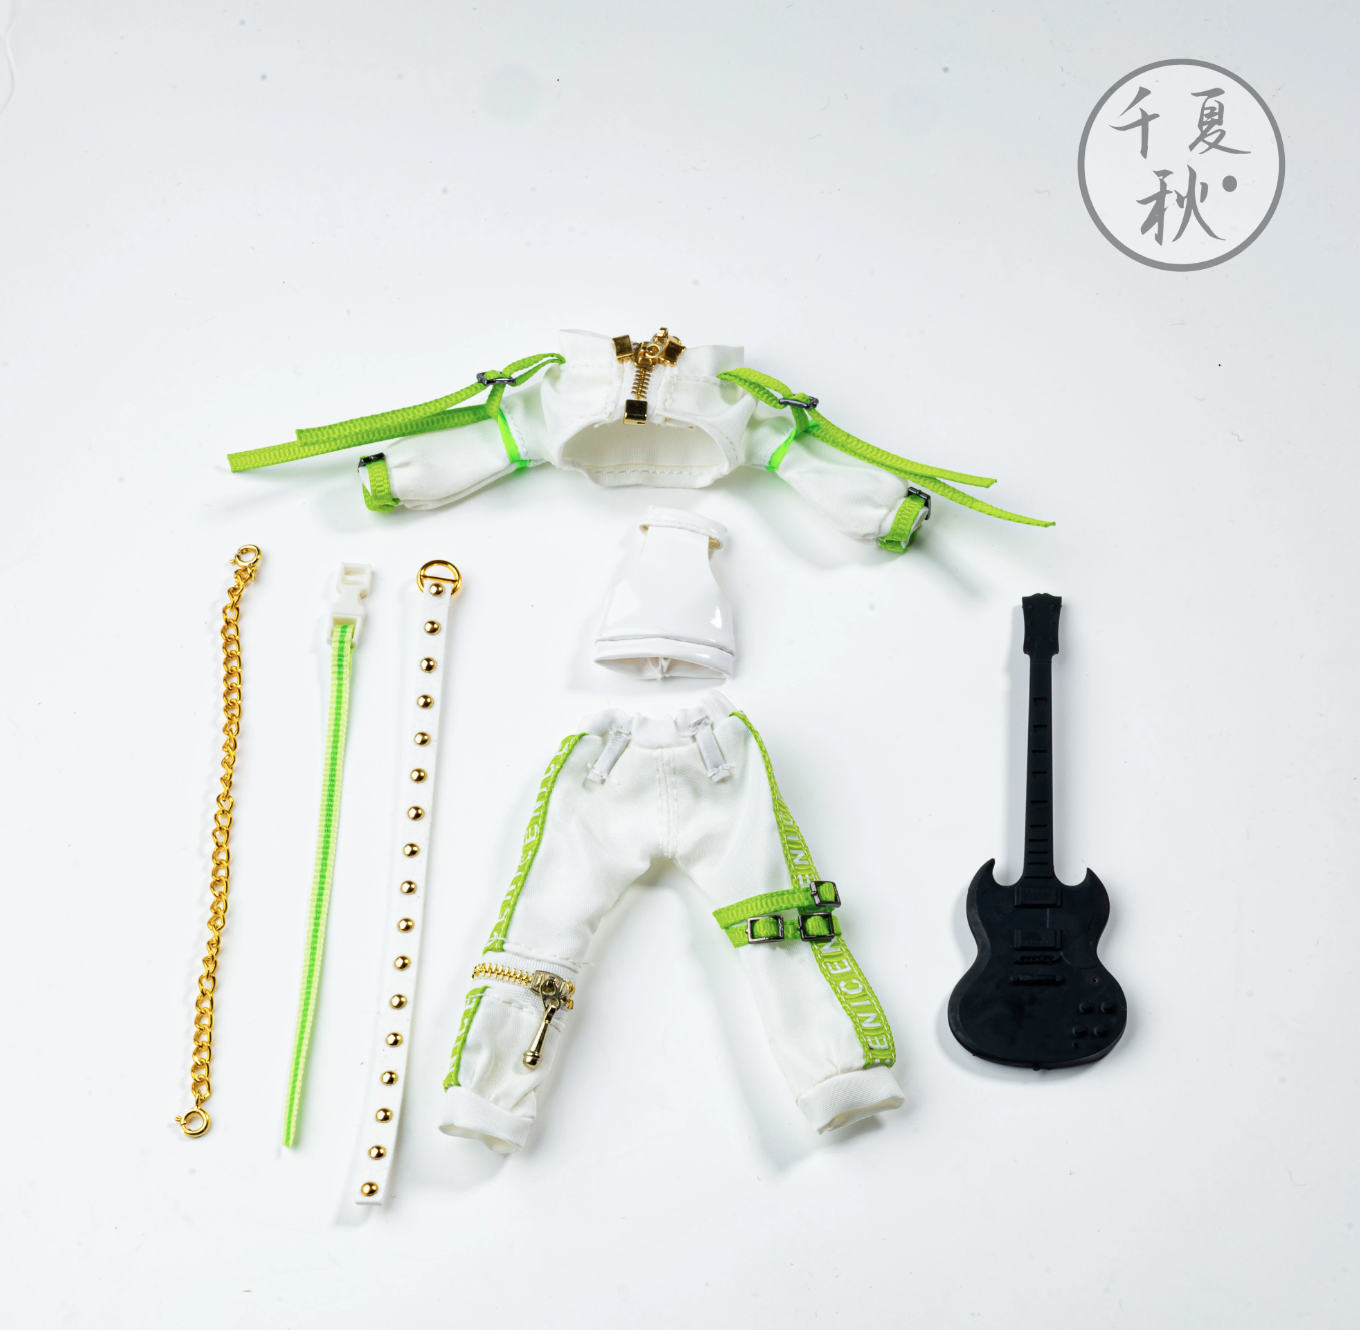 AC Chinatsuaki 1/12 Armored Girl Accessory Rock Band White Outfit + Guitar